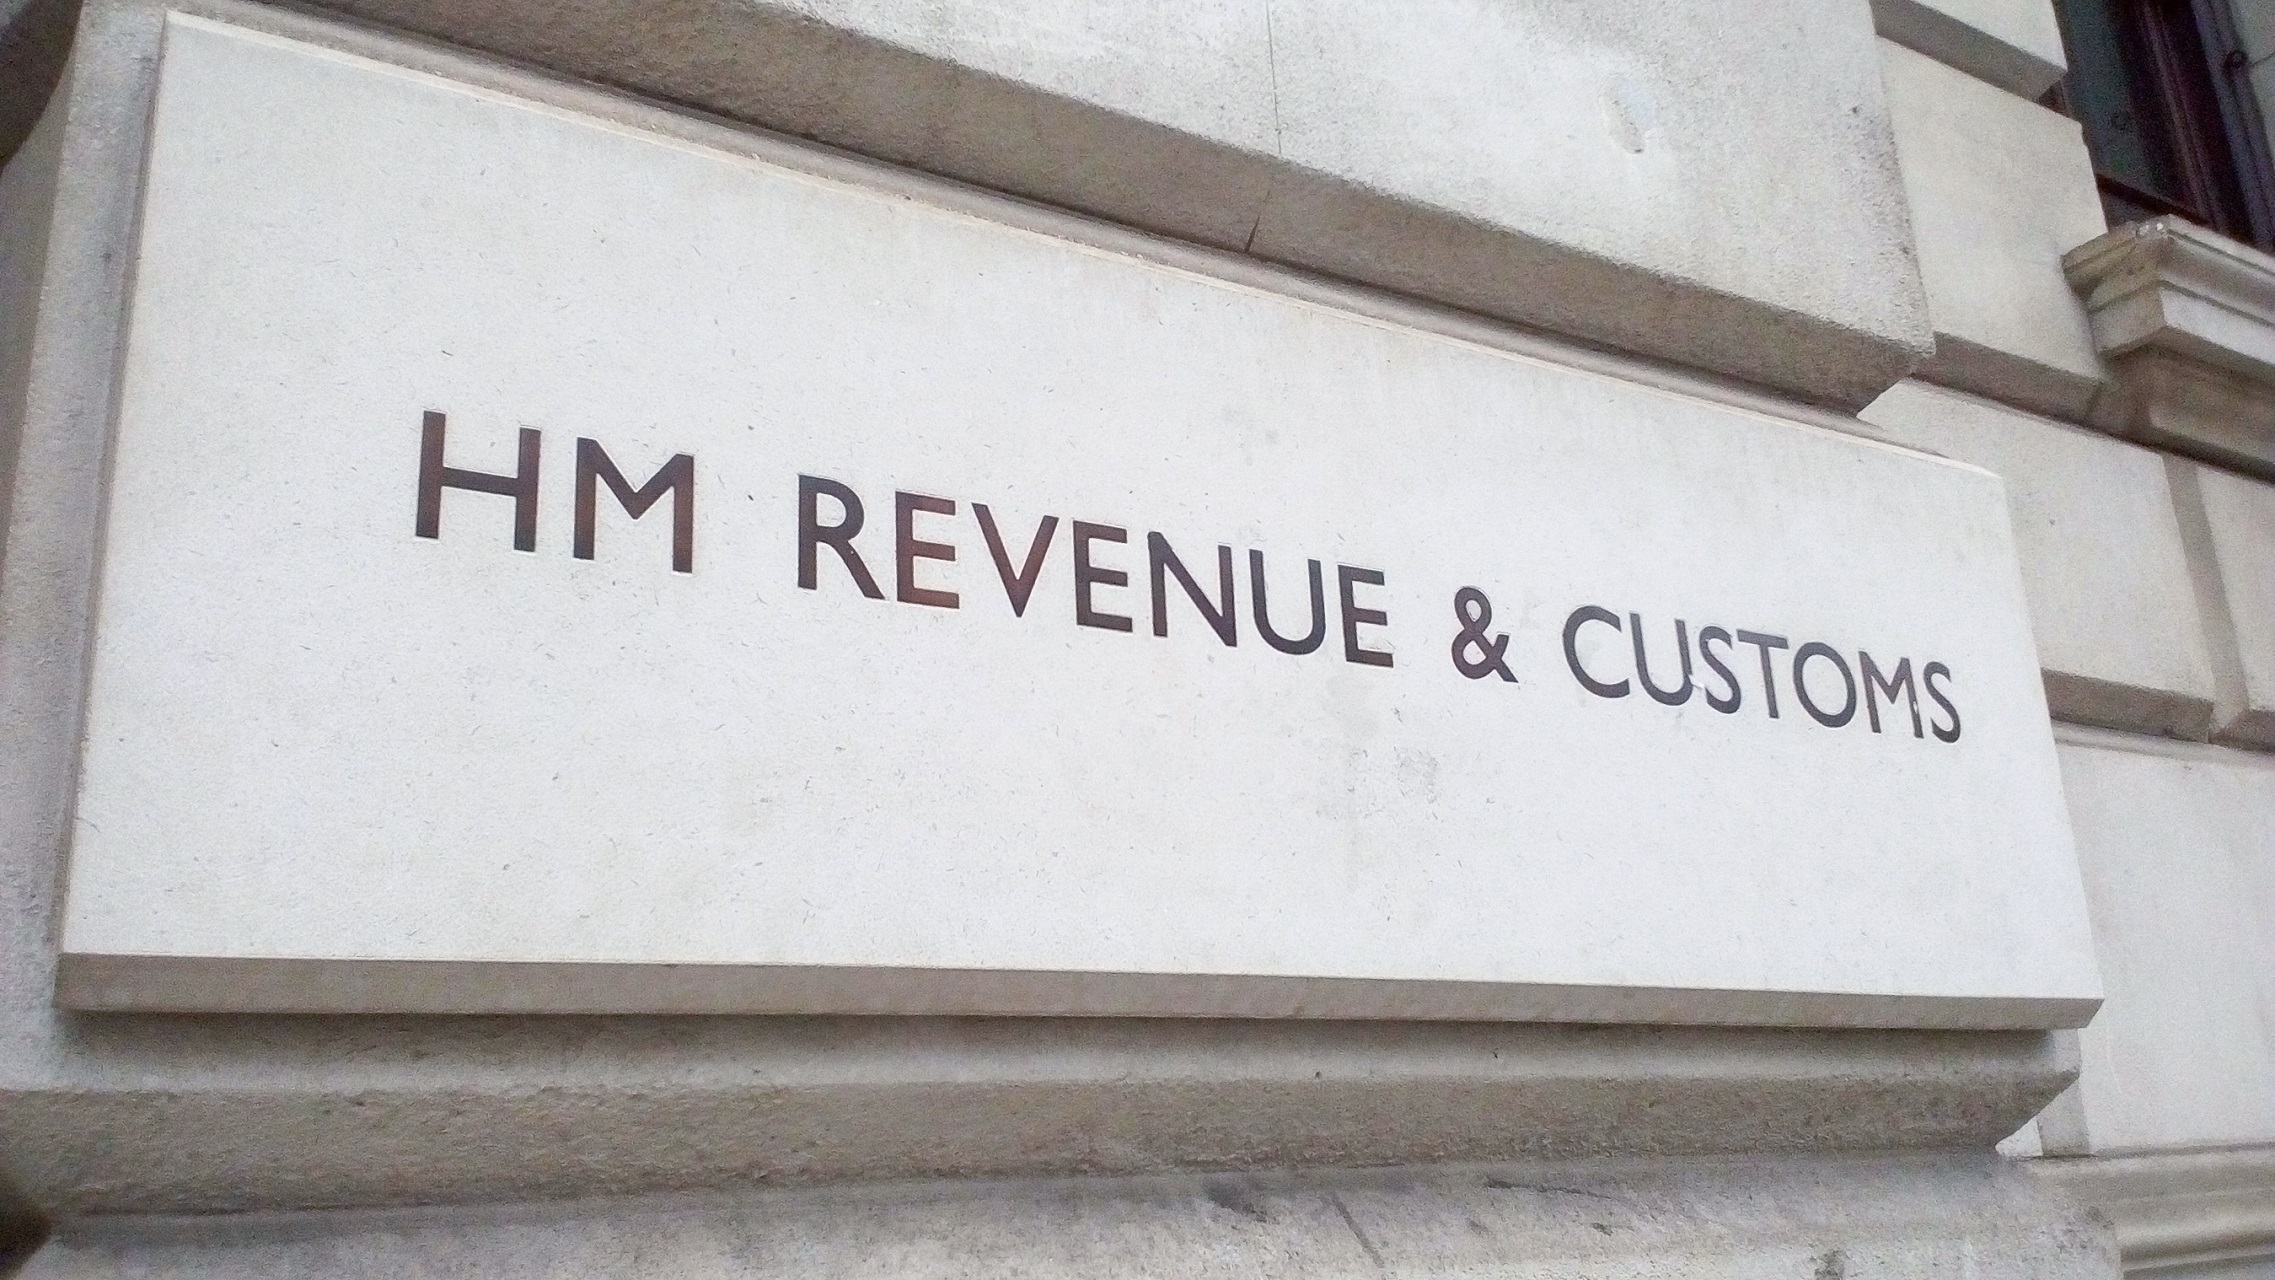 HMRC late payment interest rate hits 6.75%